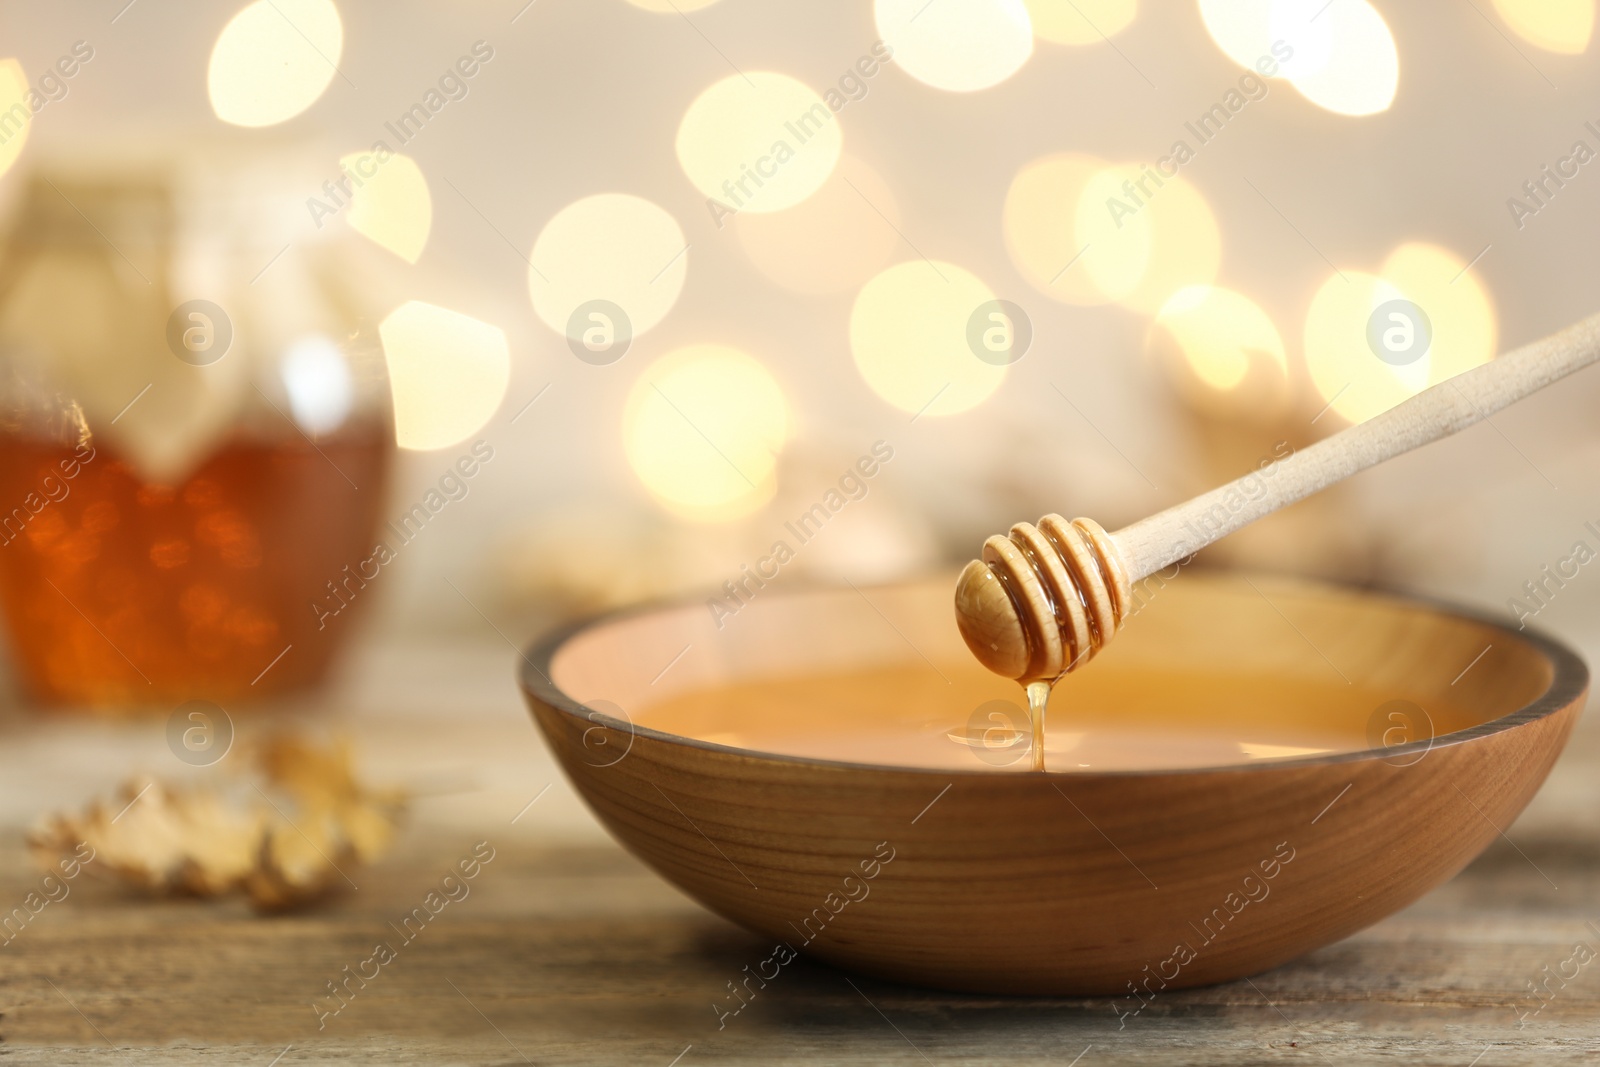 Photo of Honey dripping from dipper into bowl on table against blurred lights. Space for text